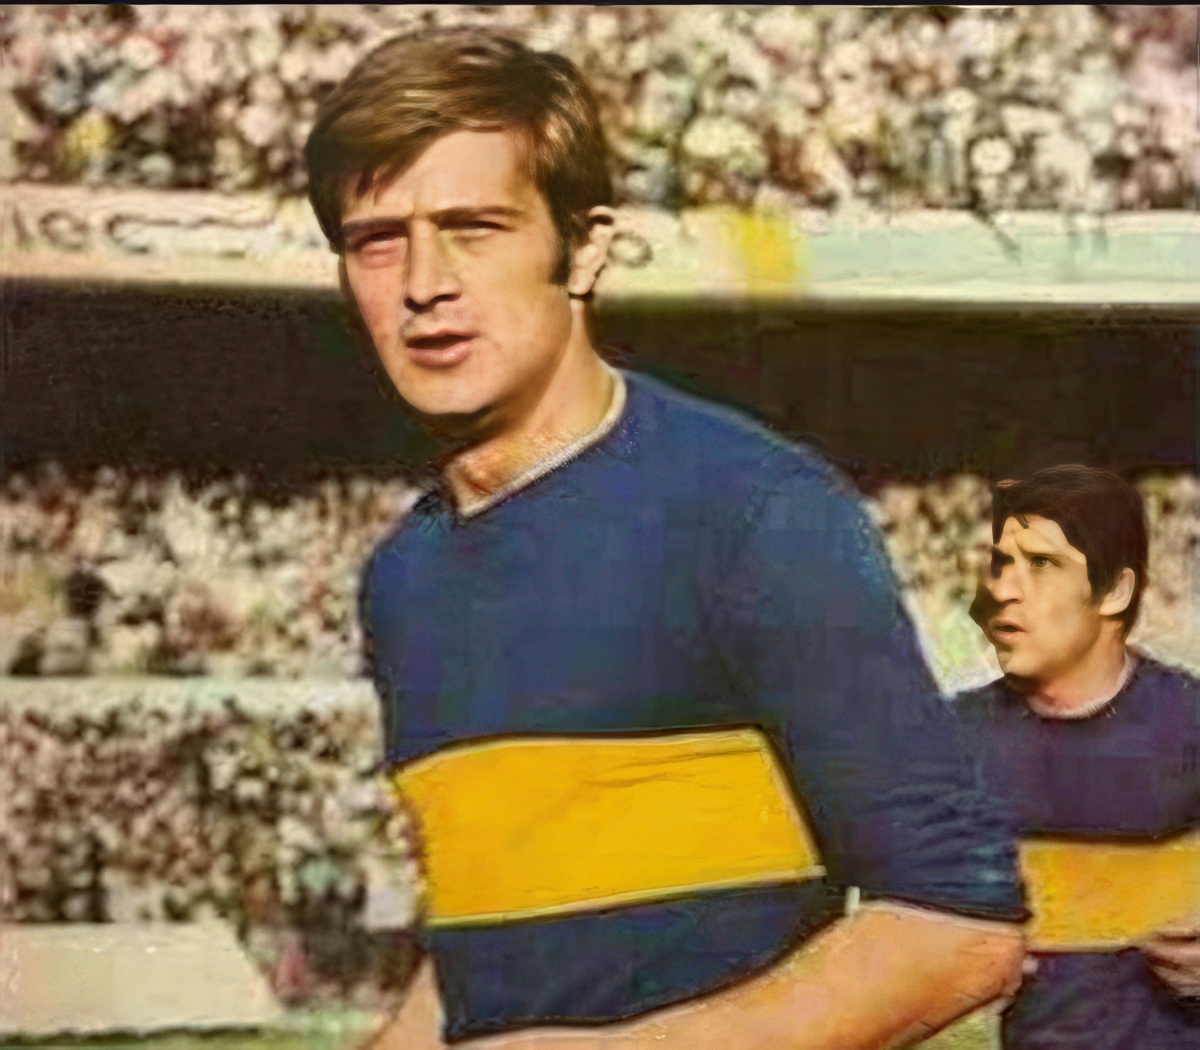 The Top 11 Players for Boca Juniors 